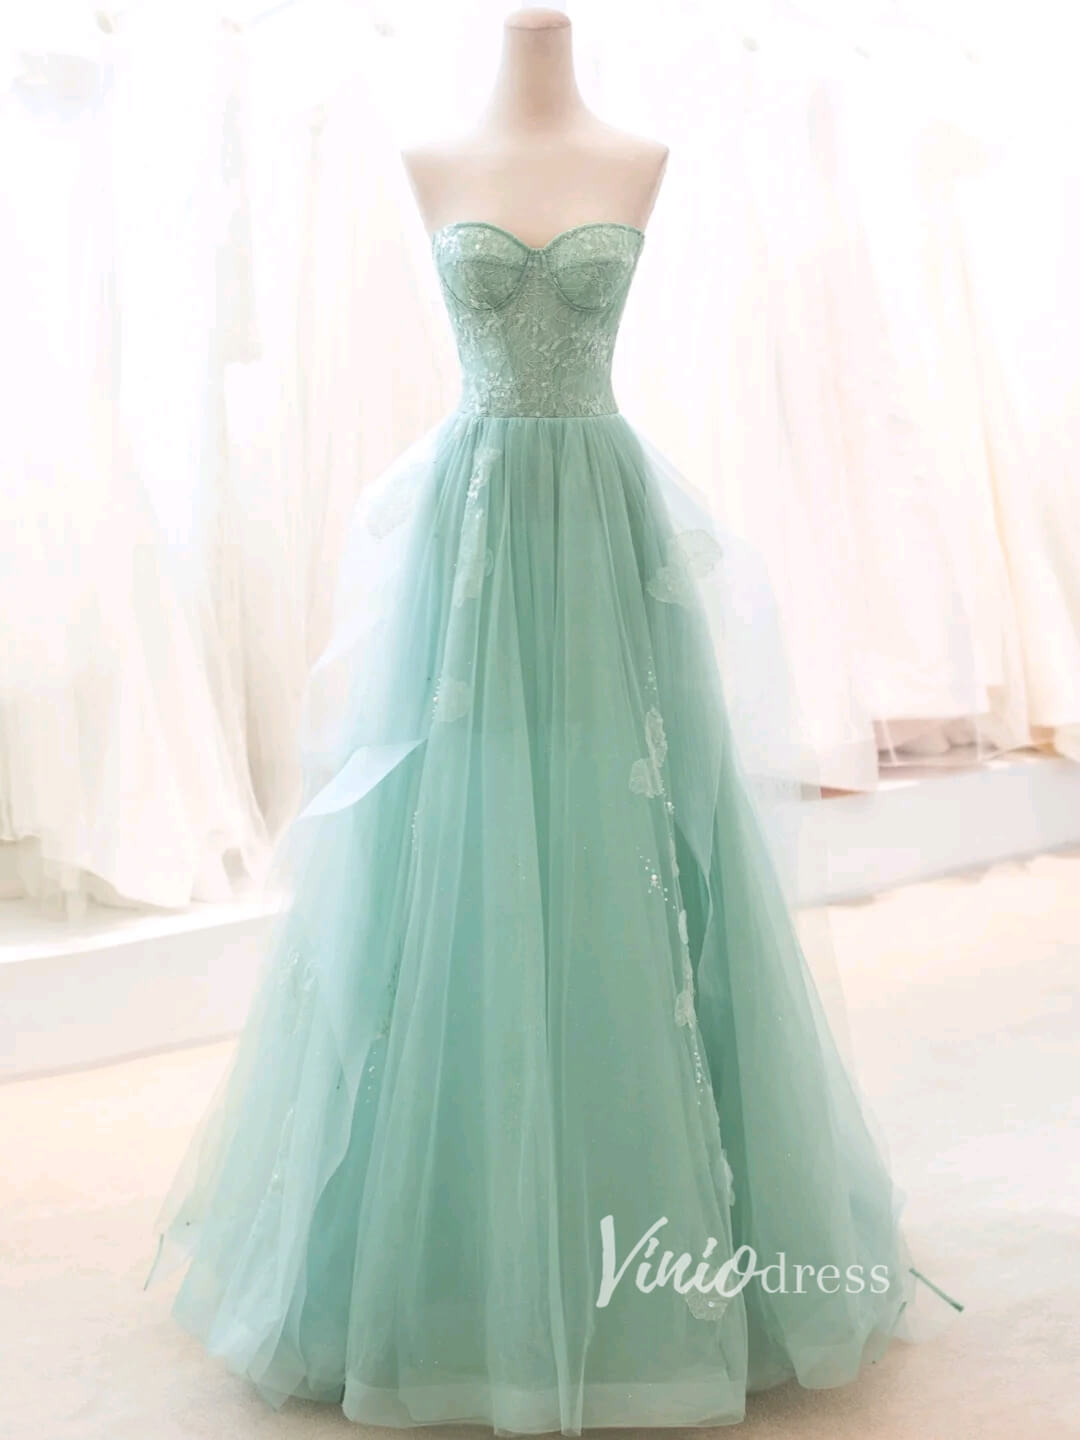 Green Tulle Prom Dresses Strapless Lace Applique Formal Dress FD3427-prom dresses-Viniodress-Green-Custom Size-Viniodress